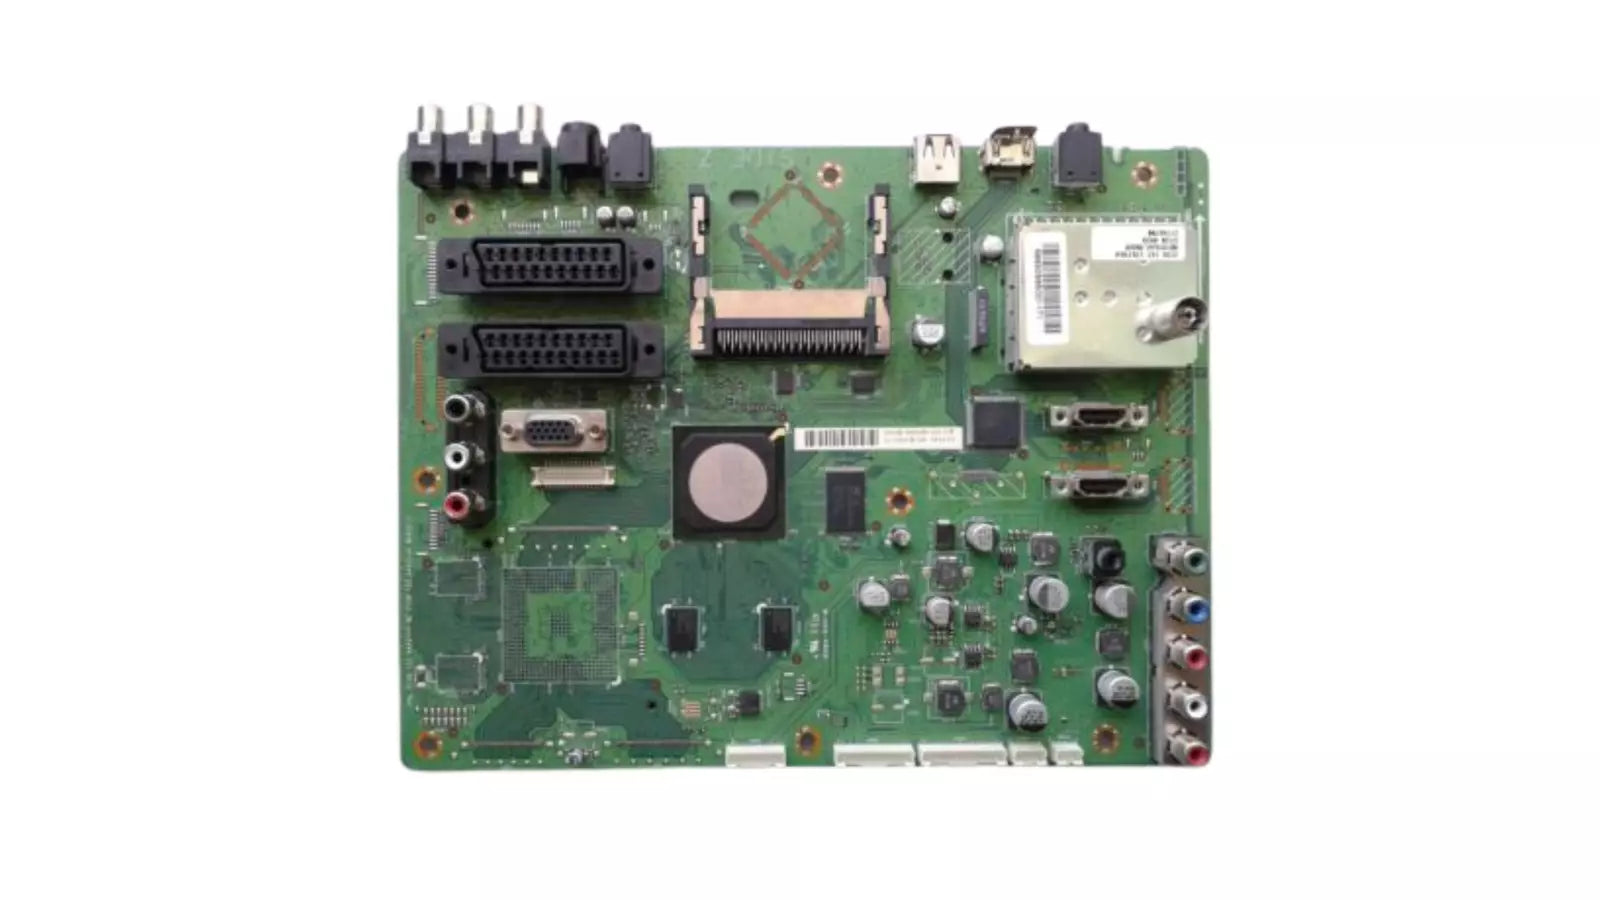 Philips 3139 123 64421v4 mainboard - for spare parts only